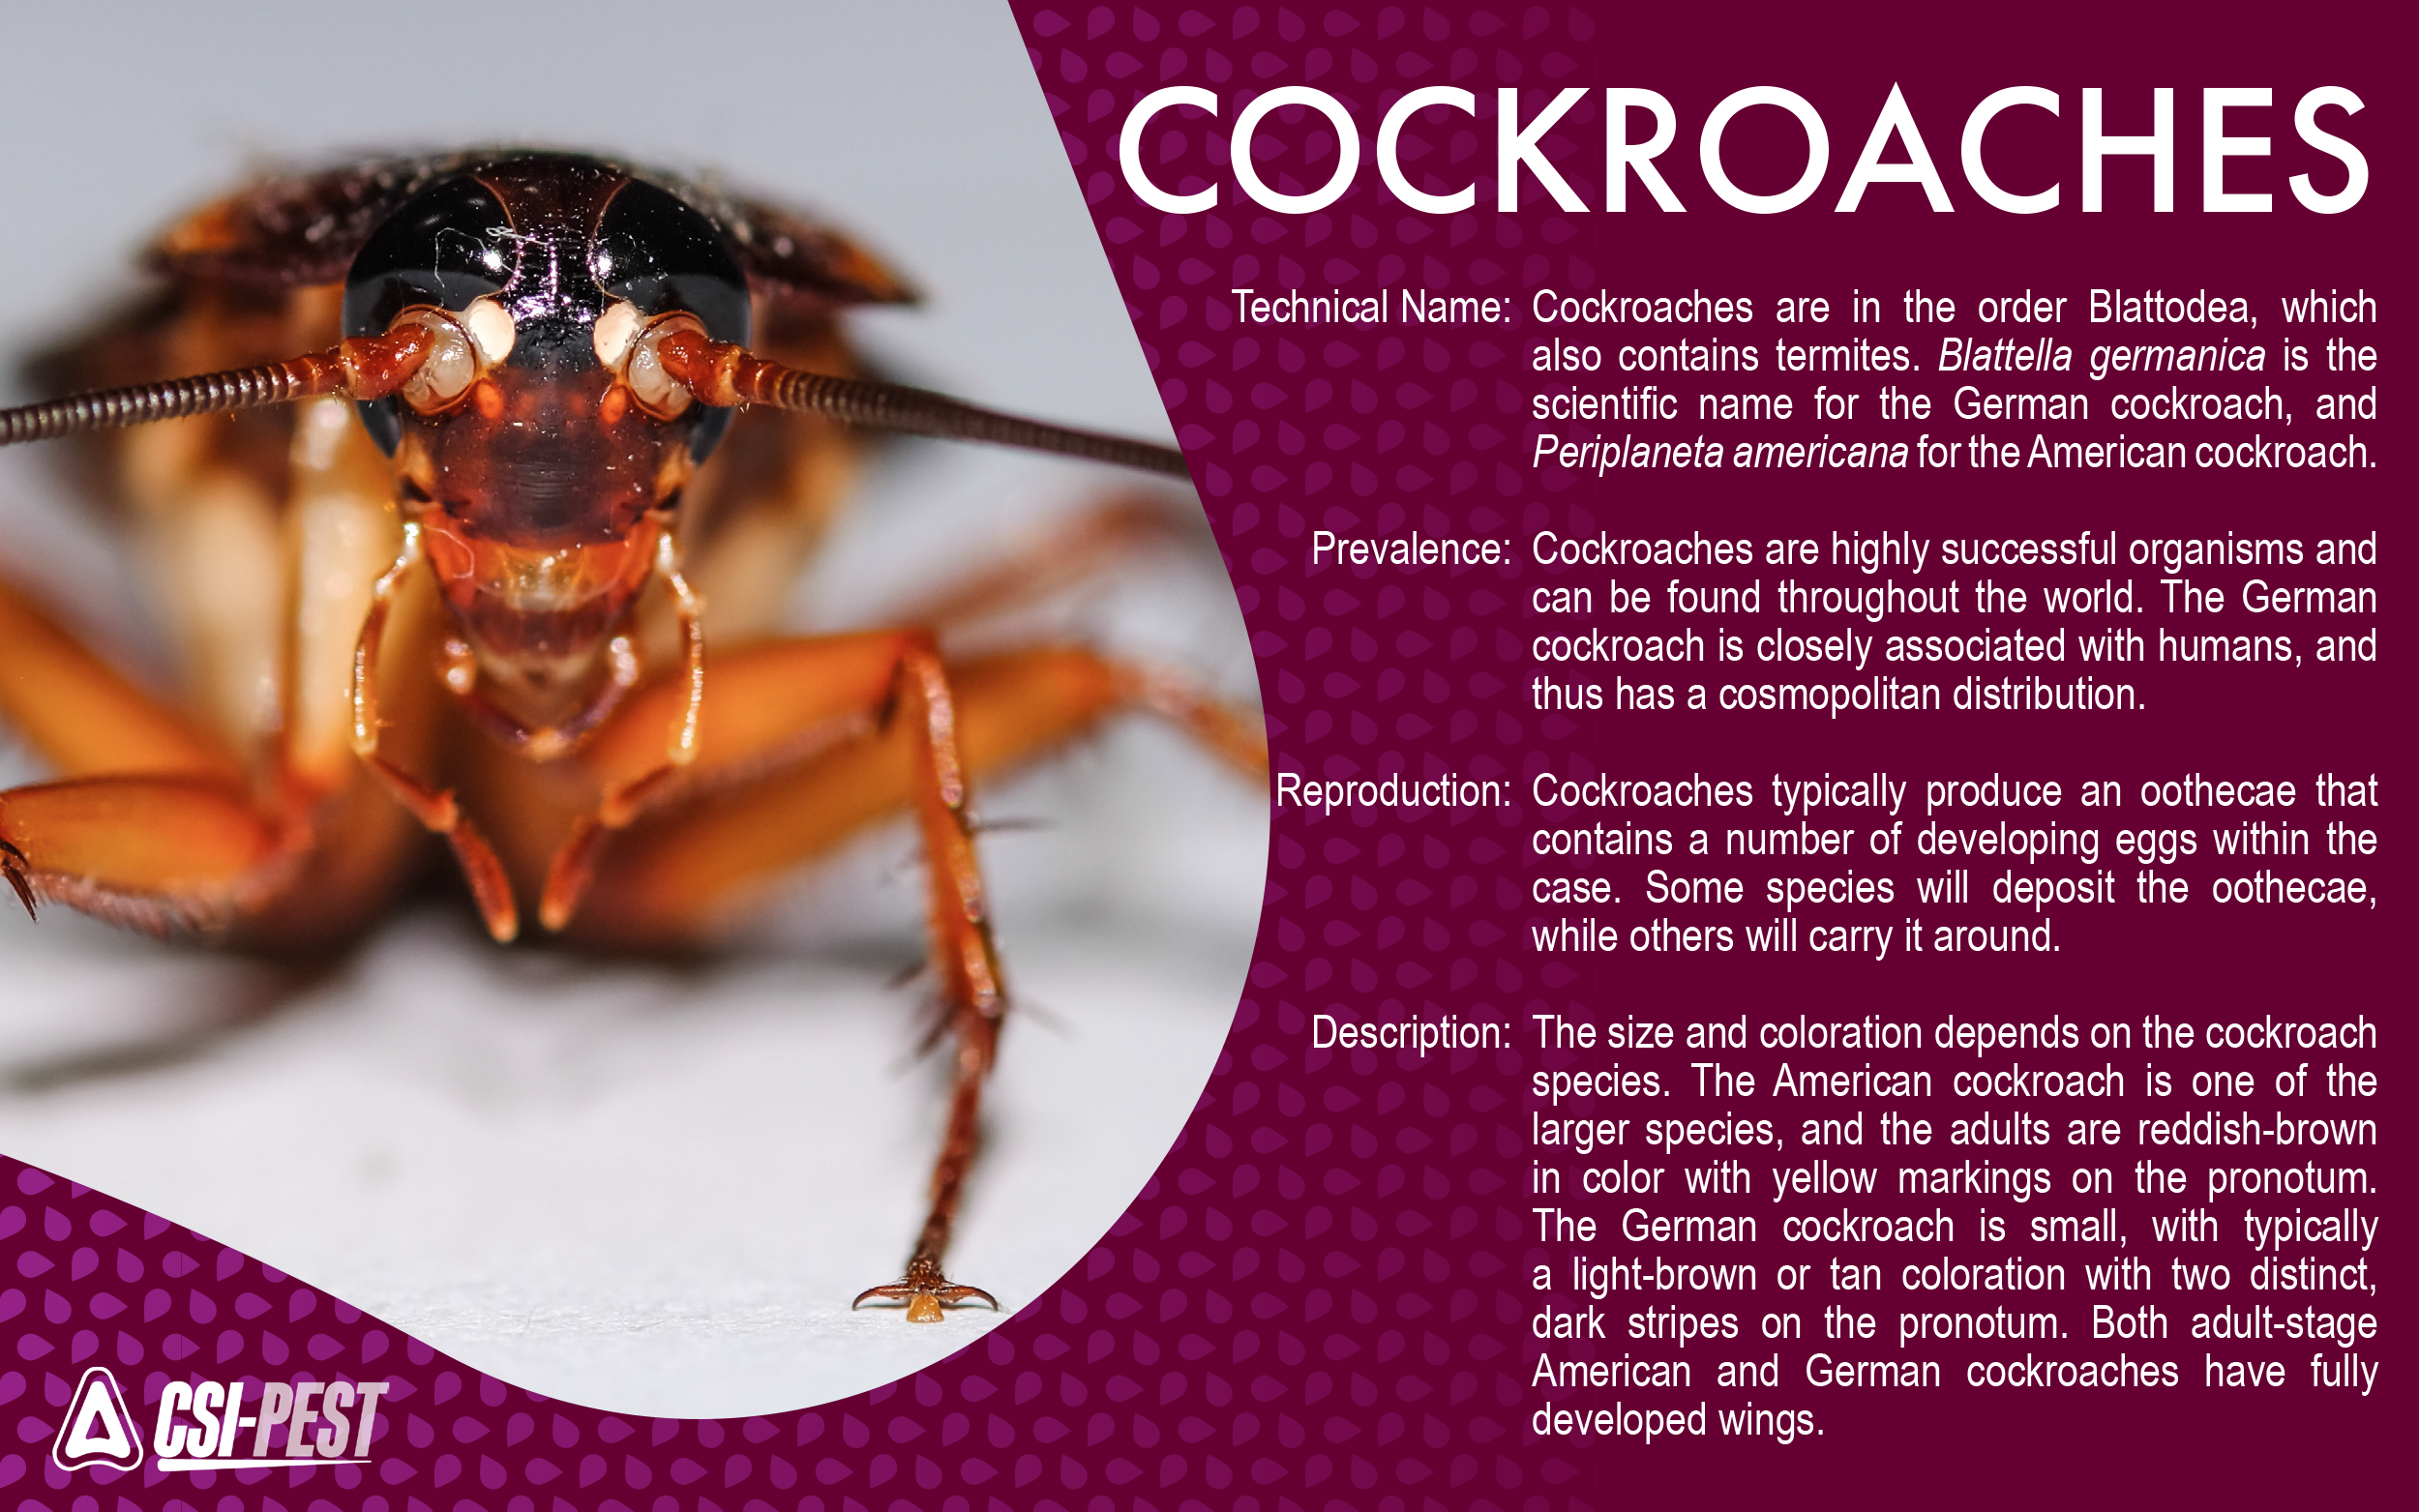 ACloser-Look-HPatterson-Cockroaches-2